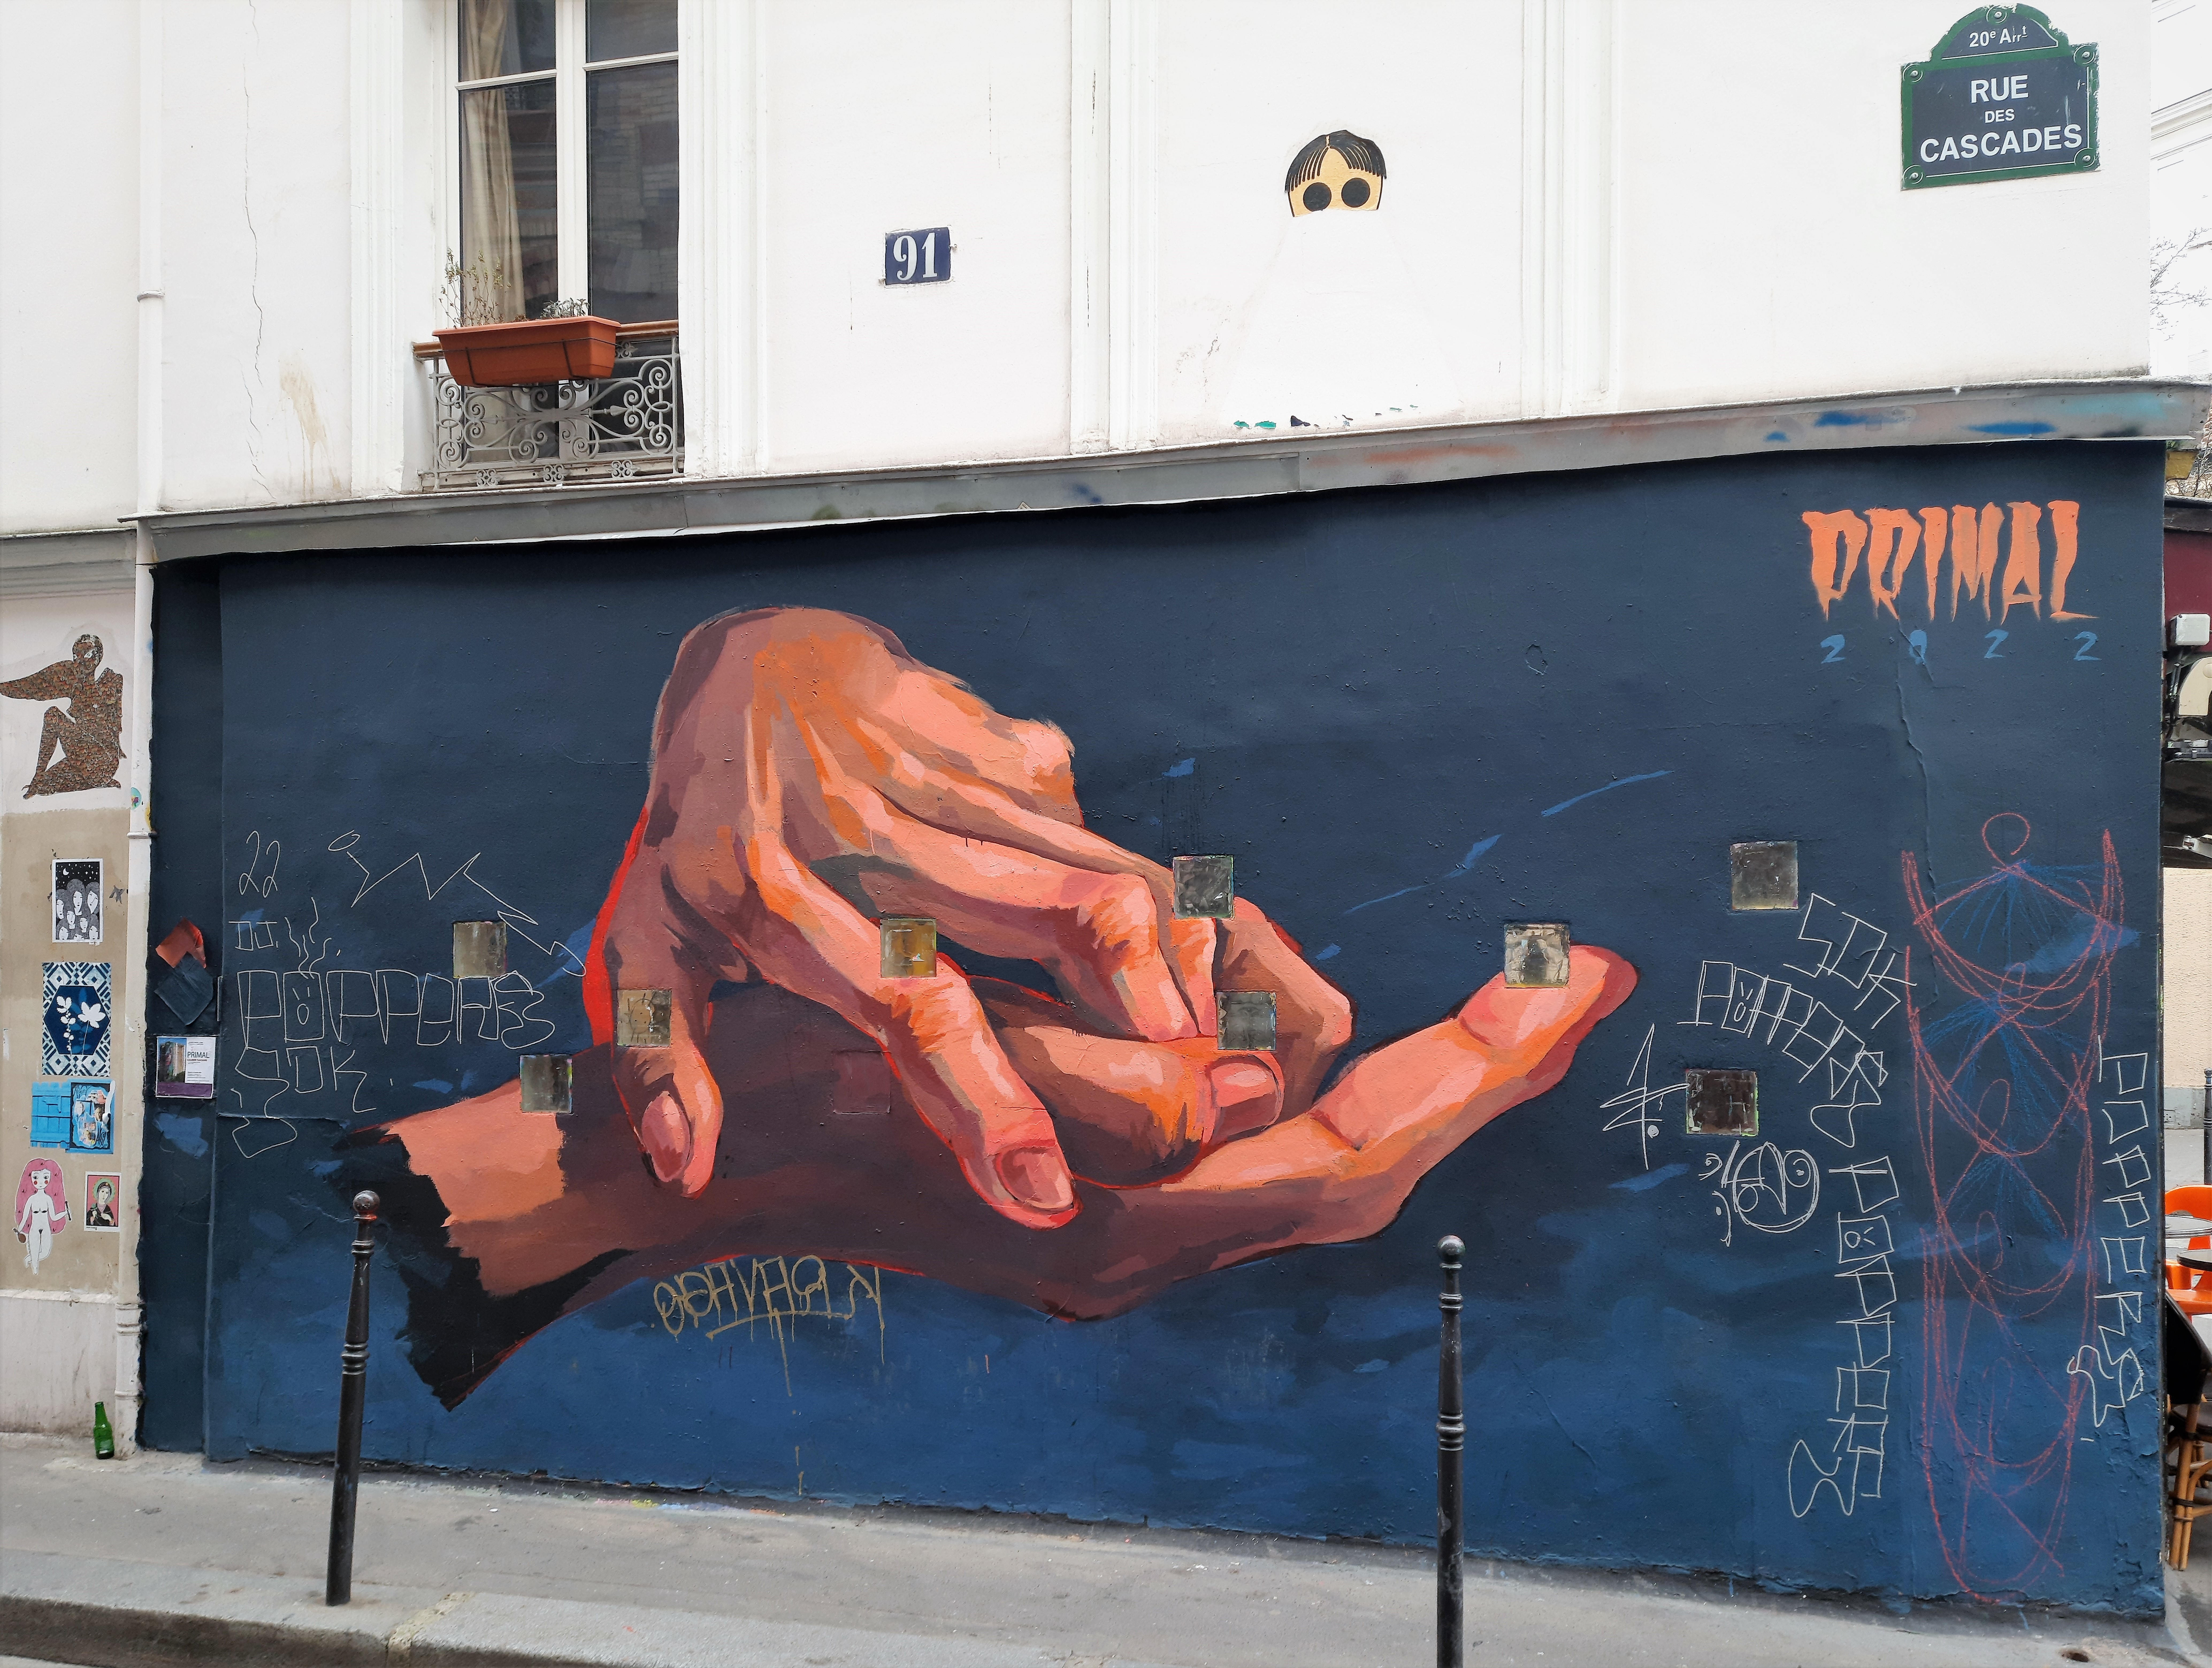 Graffiti 6527 PRIMAL by the artist Primal captured by Mephisroth in Paris France